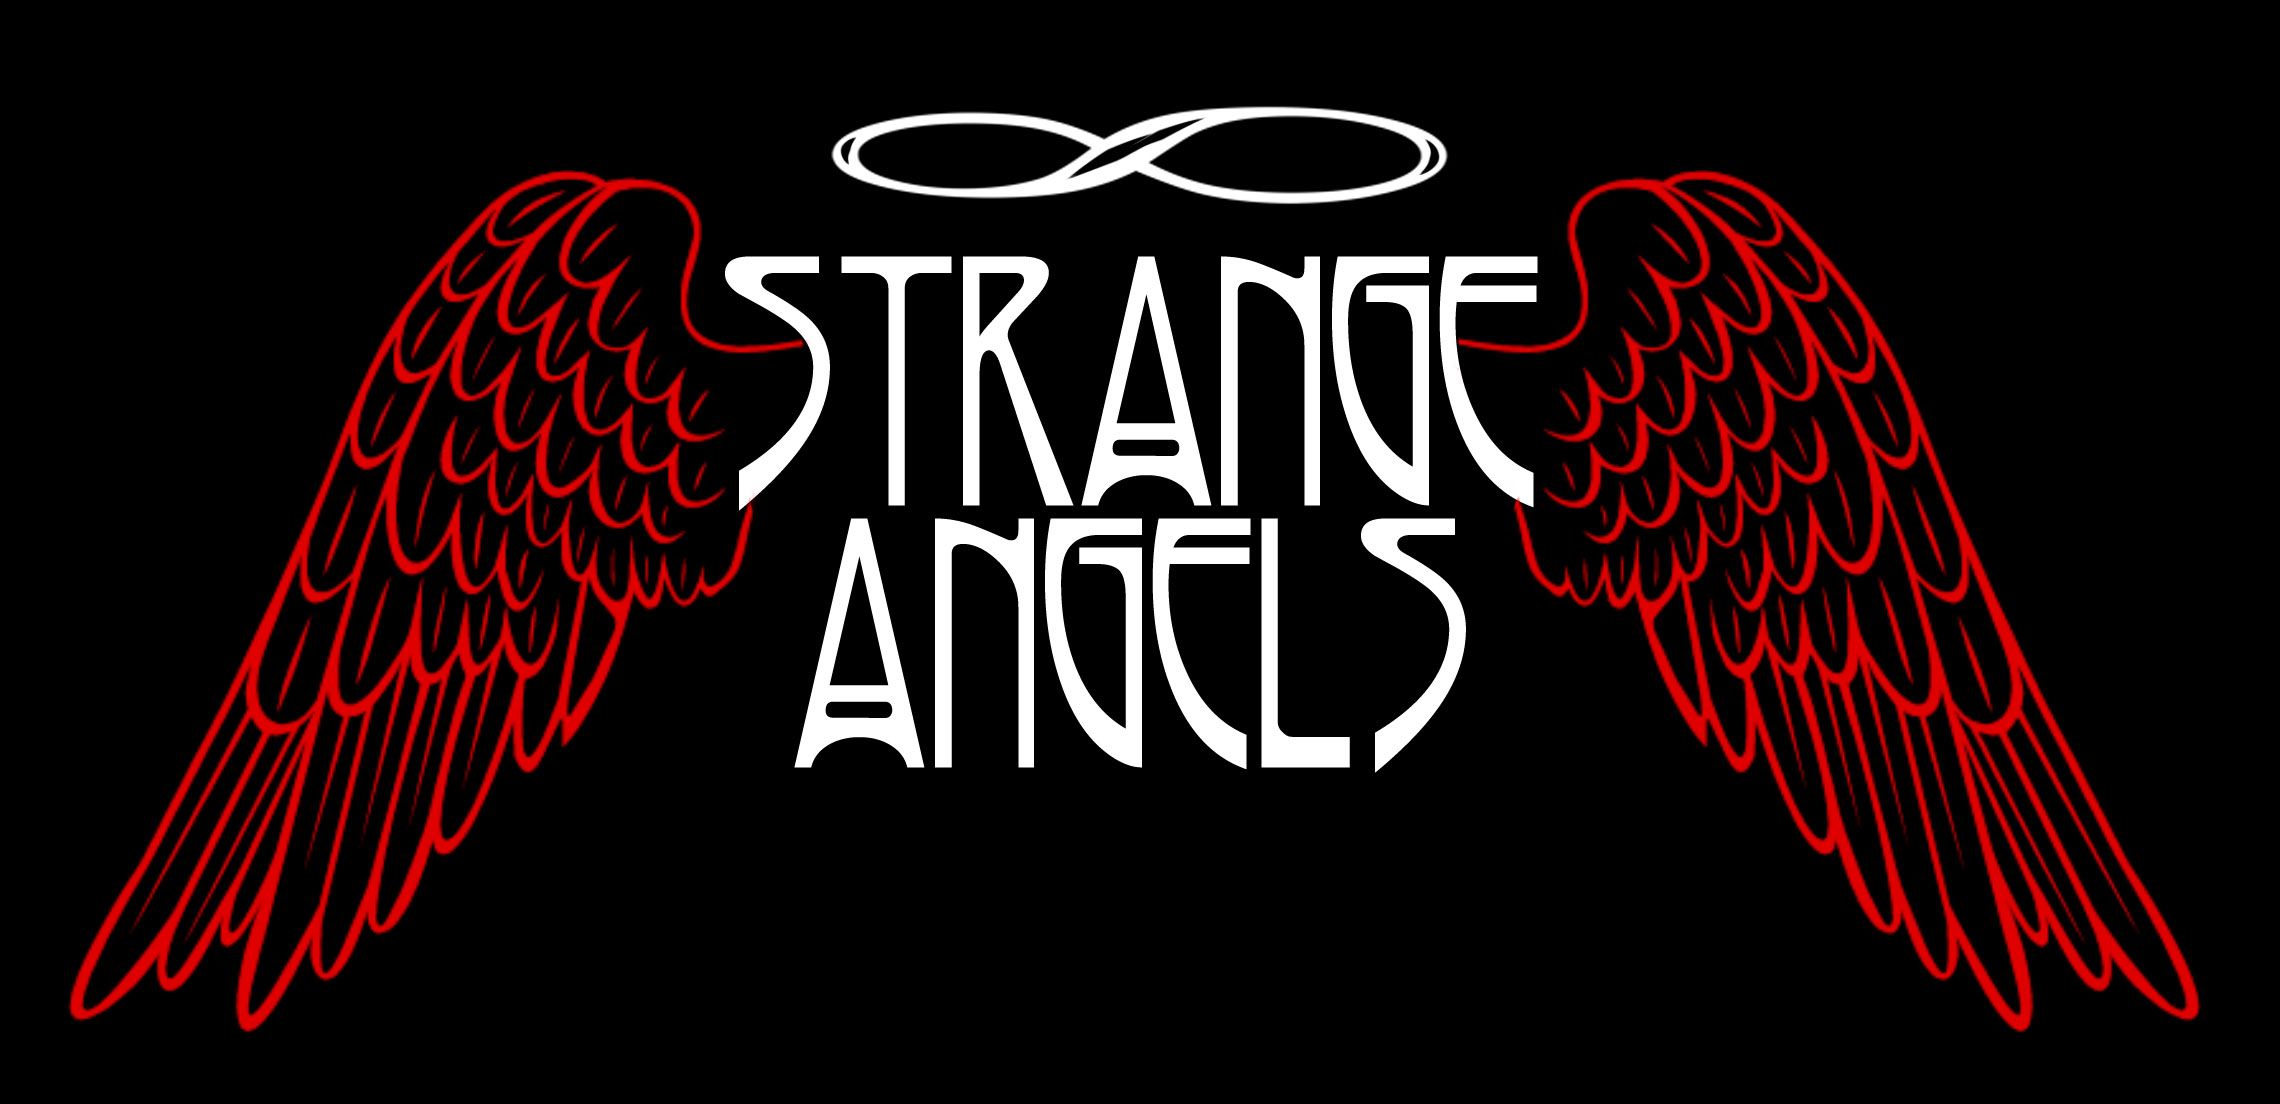 Download latest hd wallpapers of music strange music